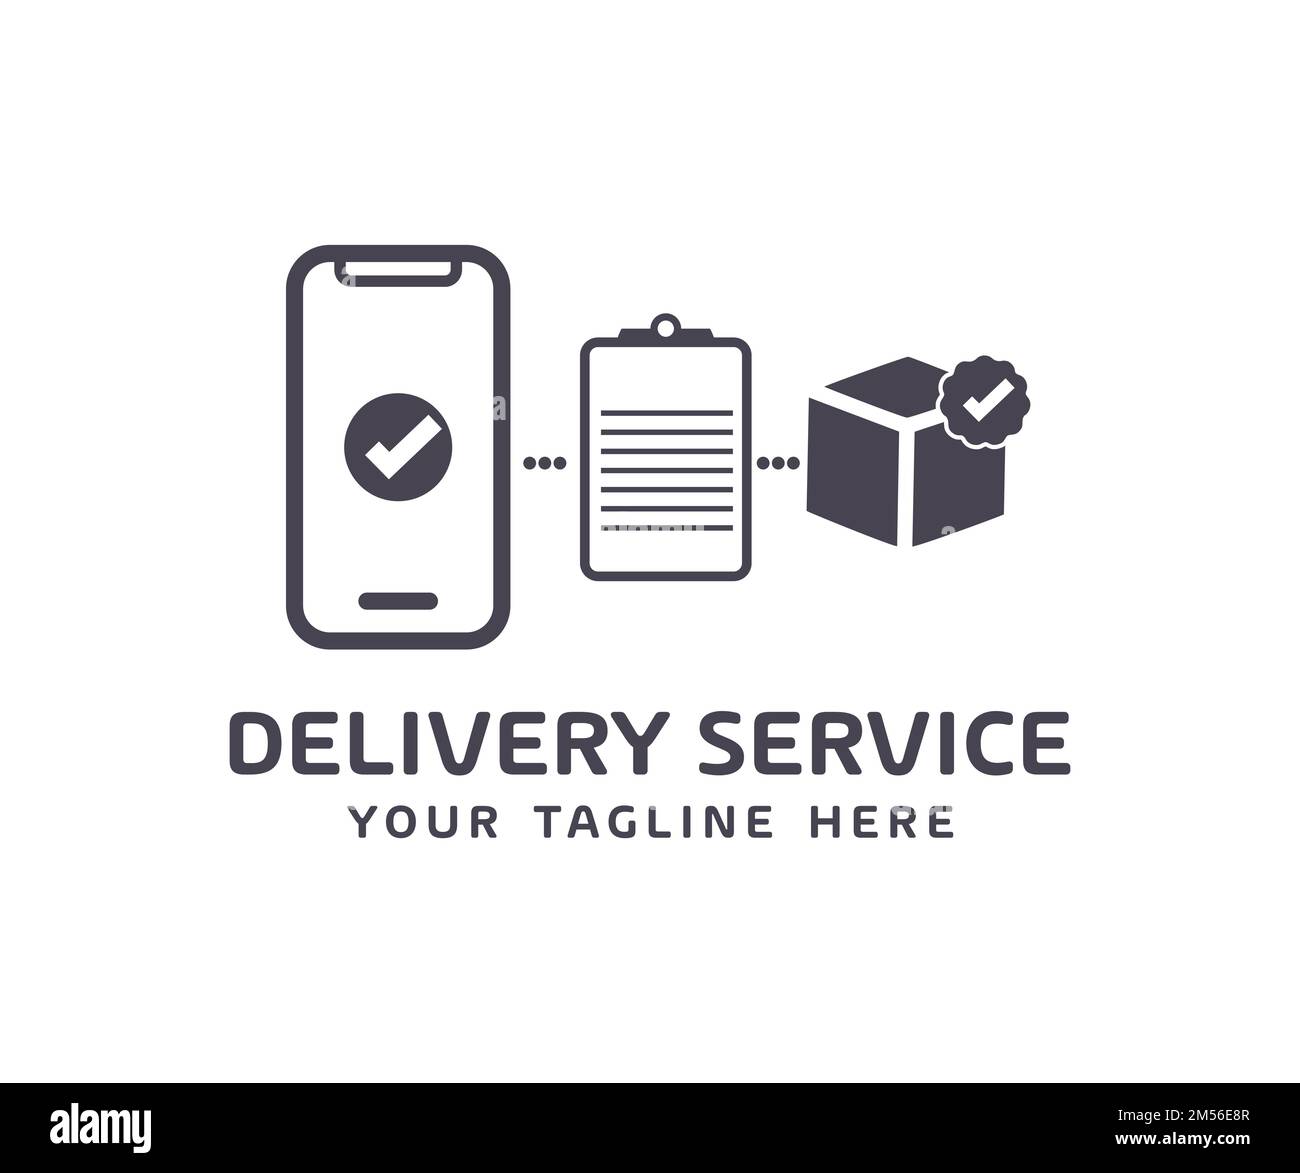 Delivery service or online order application. Parcel tracking app logo design. Online Parcel Inspection Concept. Technology, tracking and shipment. Stock Vector